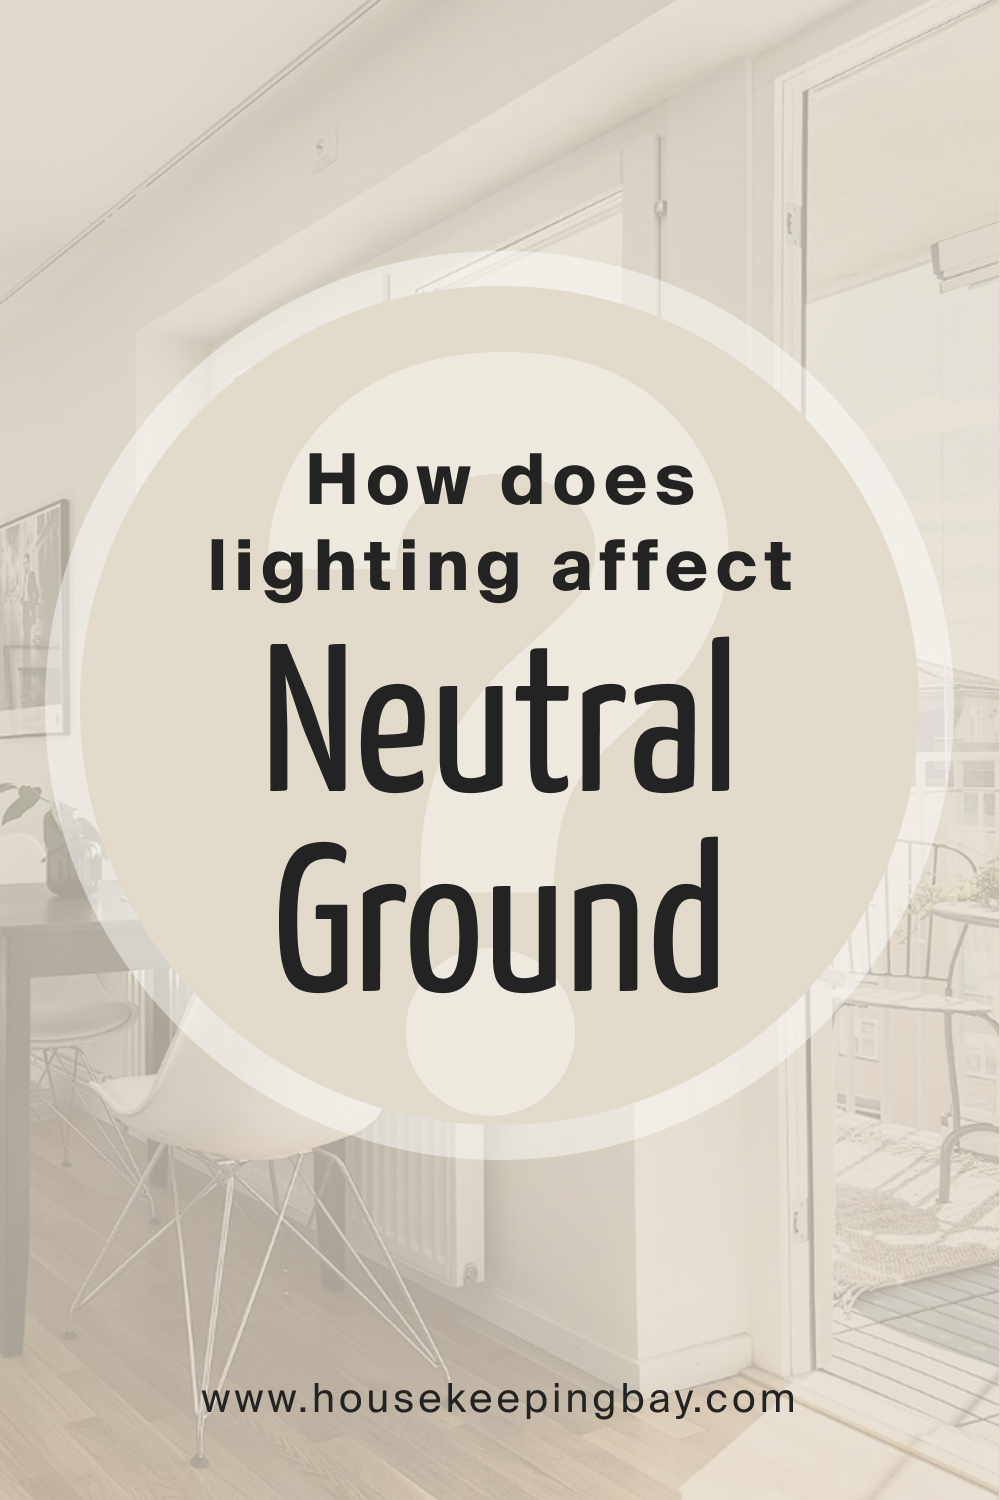 How does lighting affect SW Neutral Ground